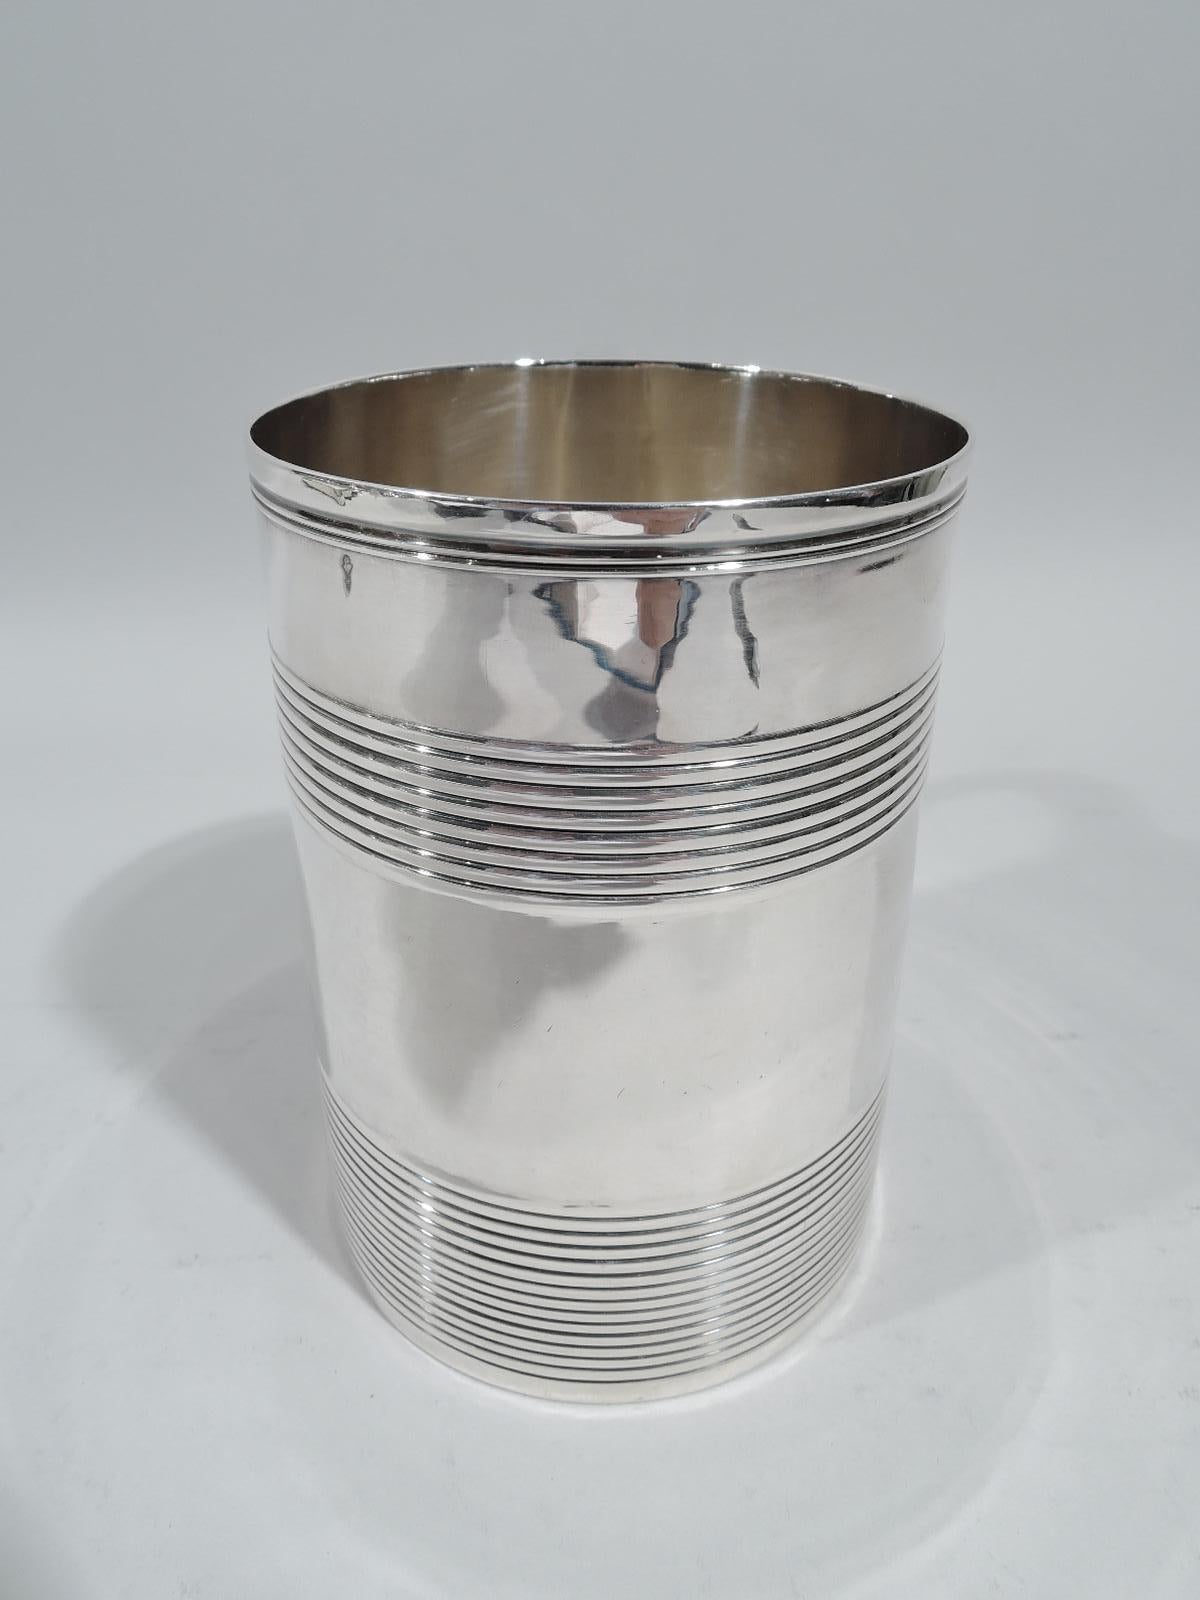 Large English Georgian sterling silver mug, 1795. Straight and upward tapering sides, capped double-scroll handle, and reeded bands. Fully marked including London assay stamp and worn maker’s stamp (possibly EB). Weight: 10.9 troy ounces.